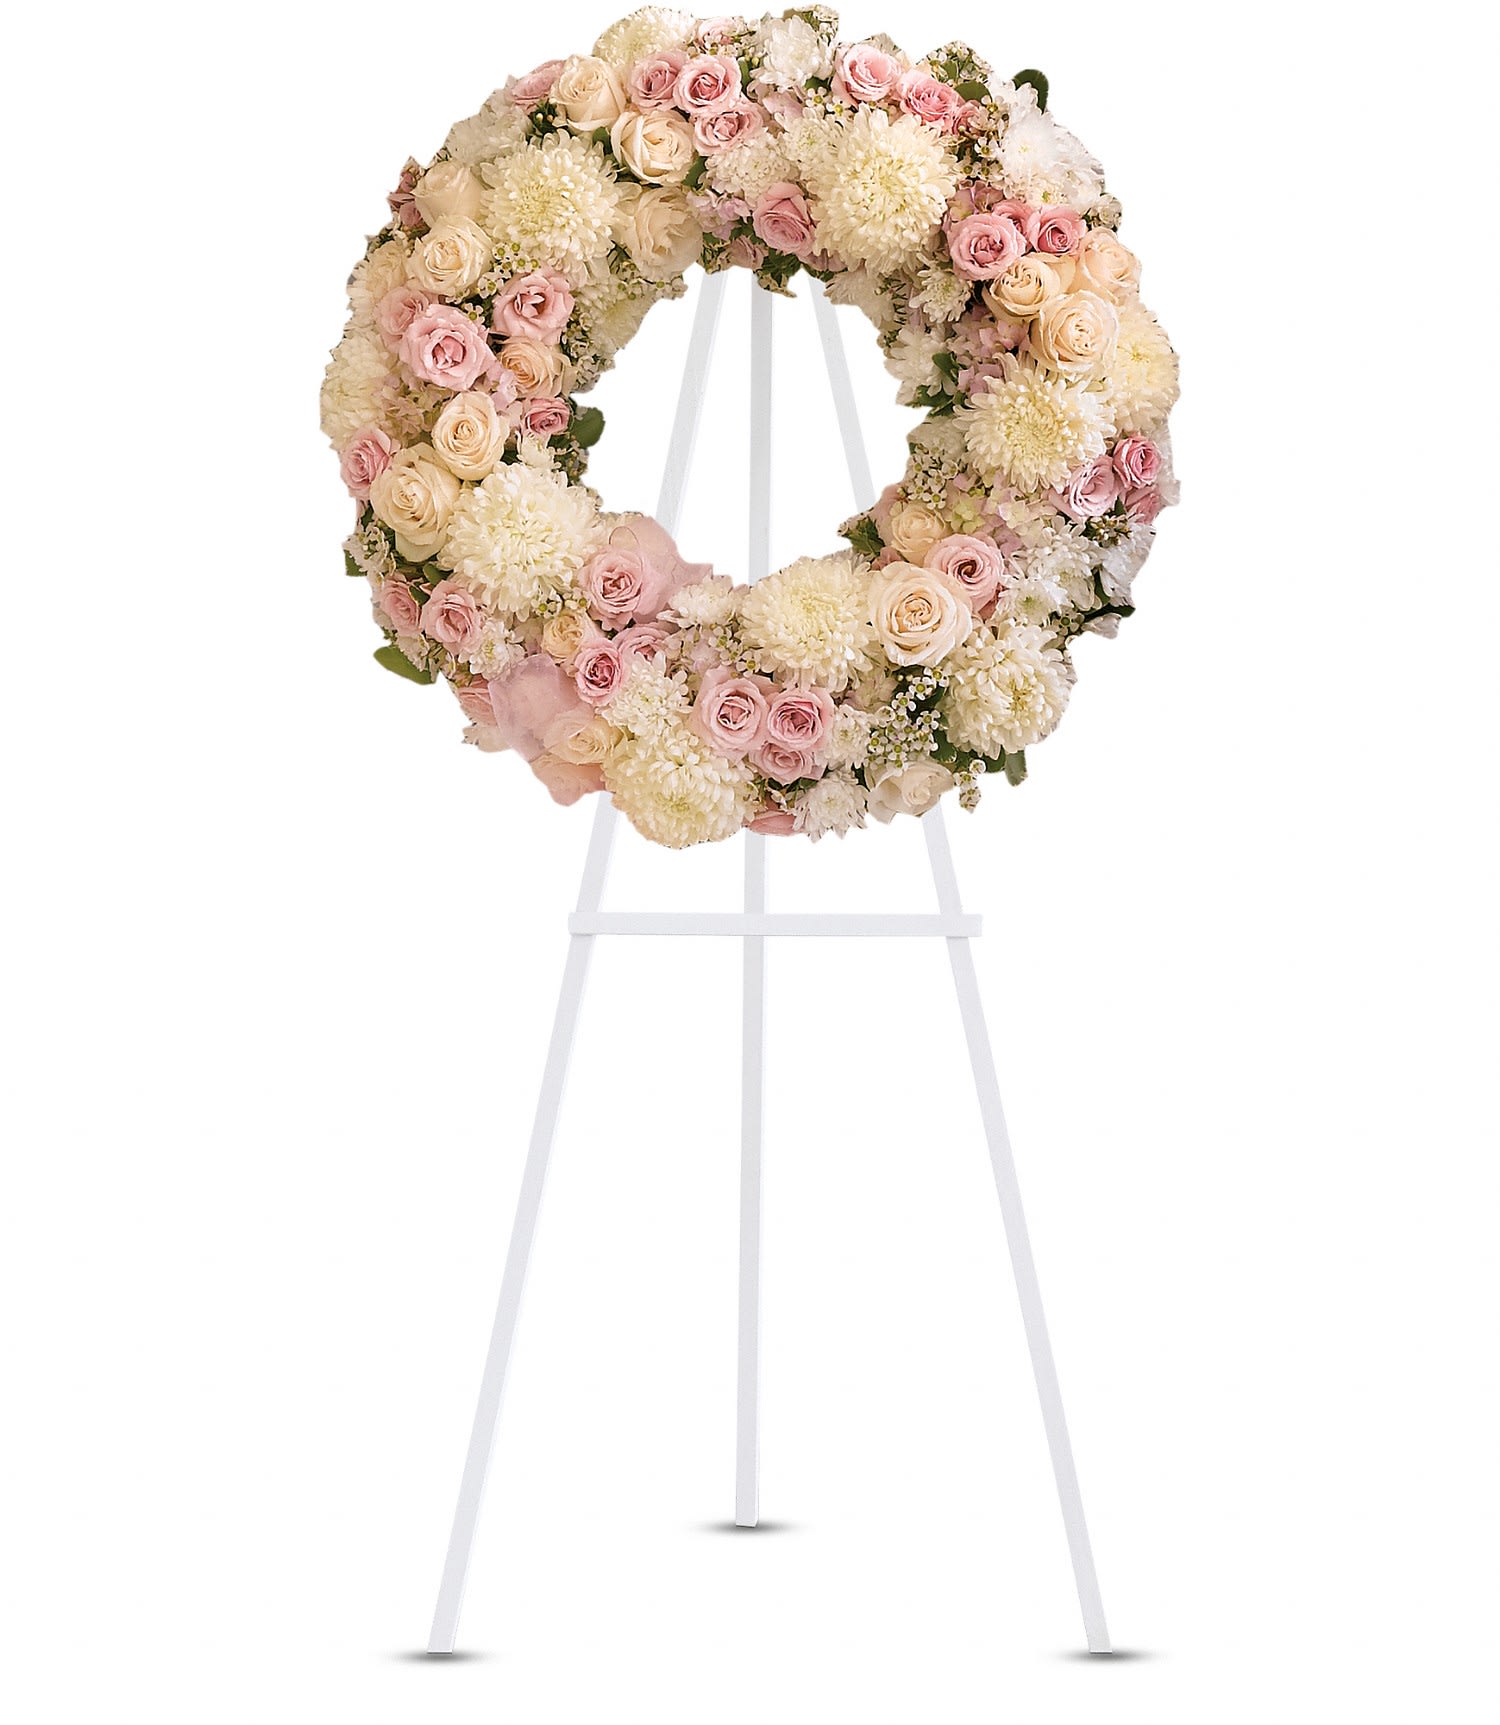 Peace Eternal Wreath Easel - A breathtaking expression of love and devotion, this lovely wreath delivers a message that is both subtle and strong. Its soft pastel blossoms will soothe, while its extraordinary beauty will express the depth of your emotions.